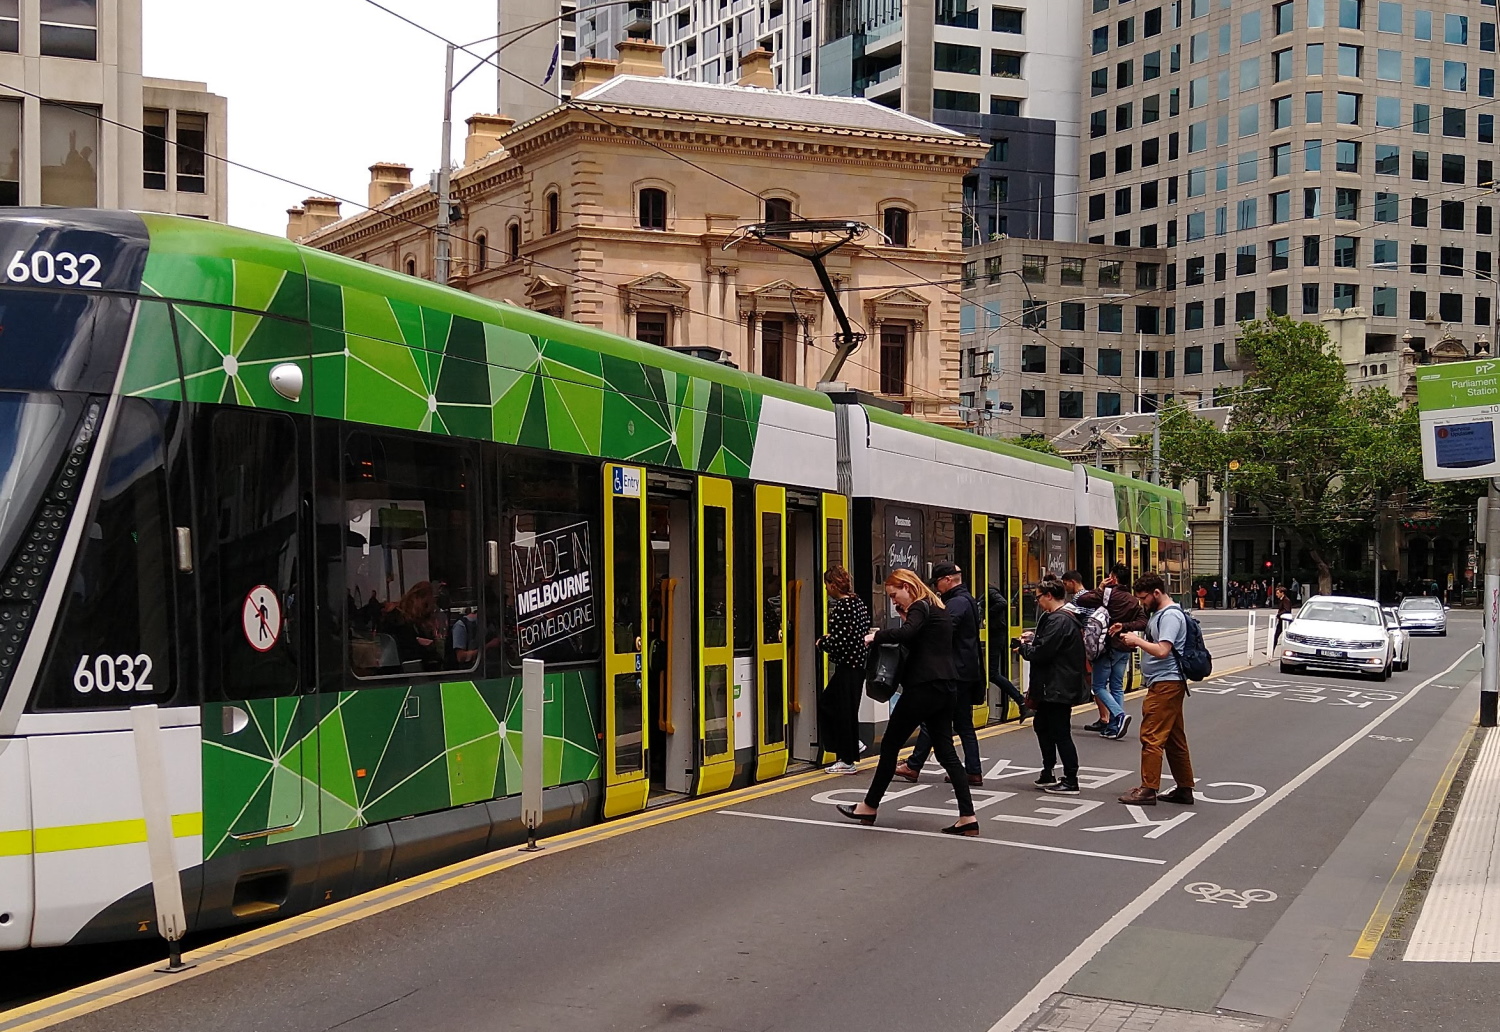 Enough is enough: Time for Tram Cams to stop dangerous motorists